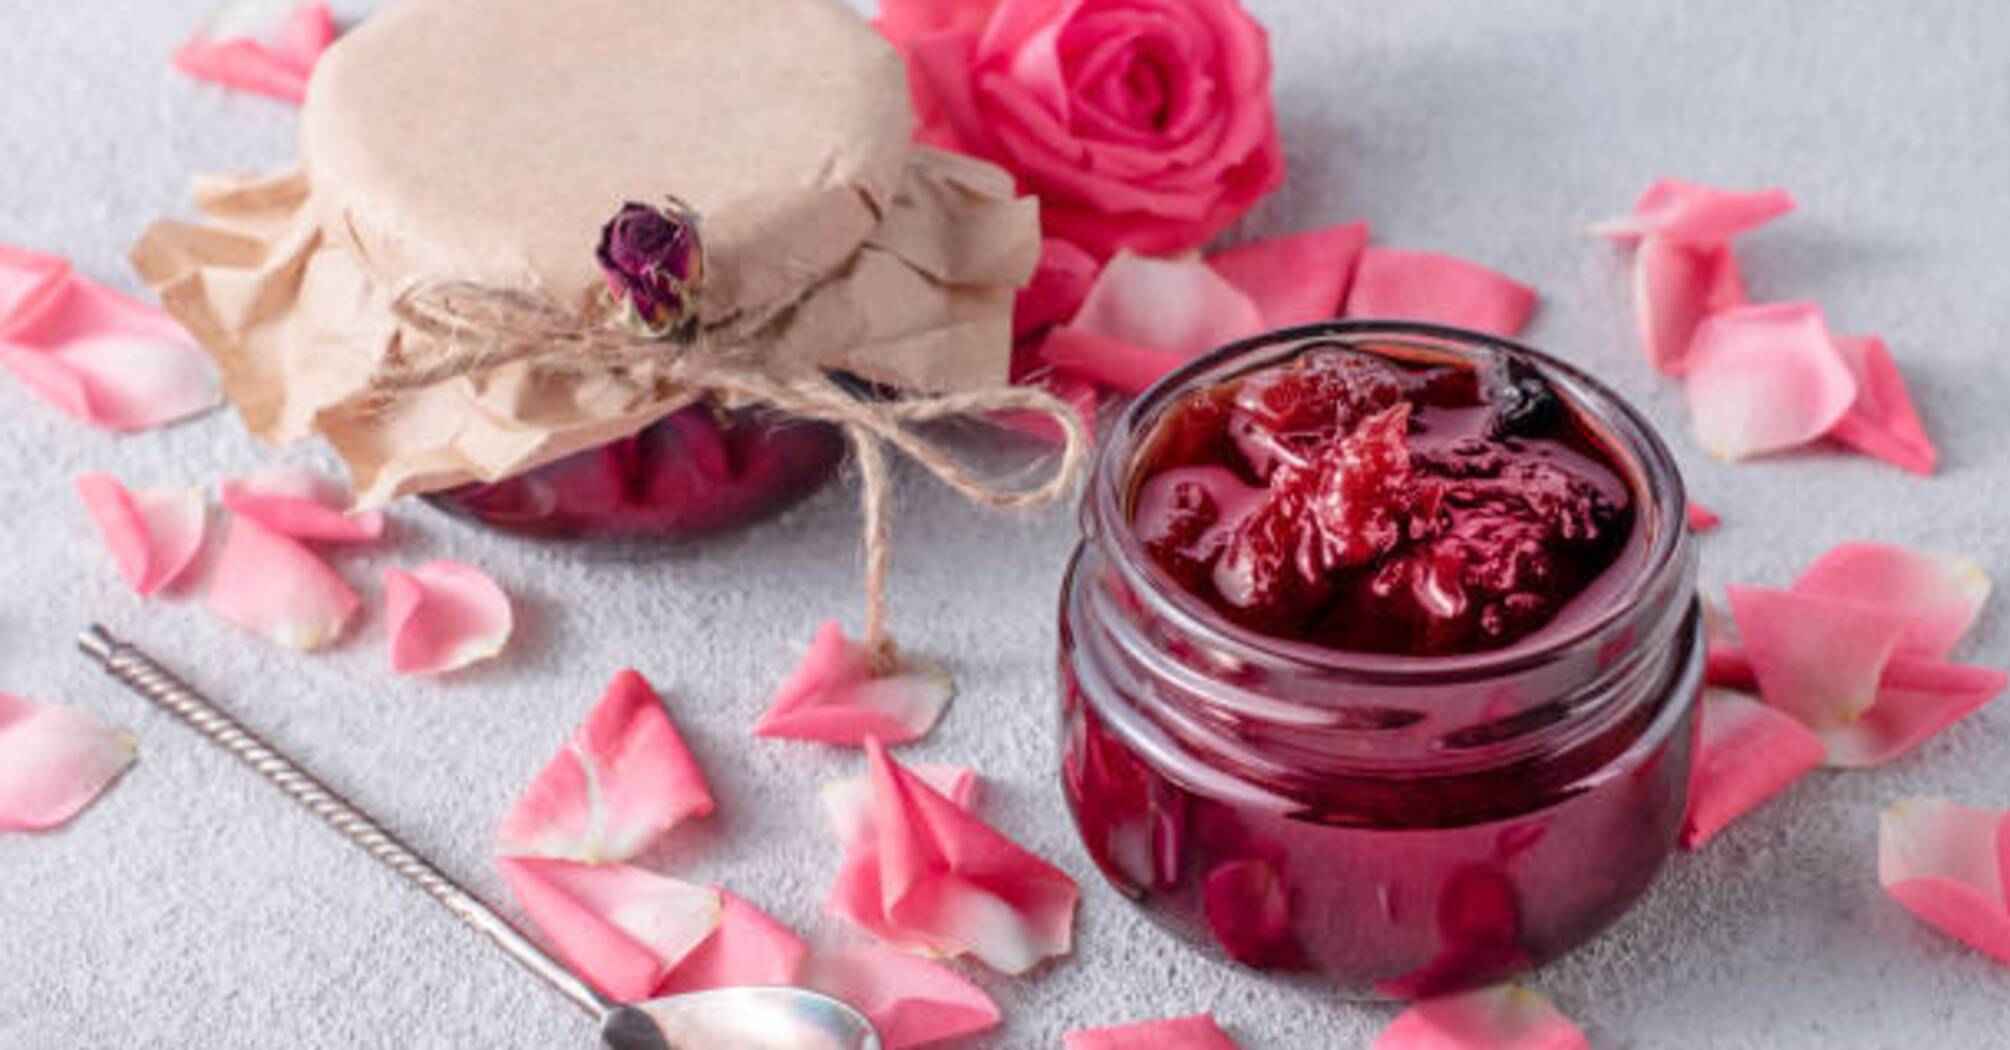 Rose and strawberry jam: how to prepare an exquisite dessert